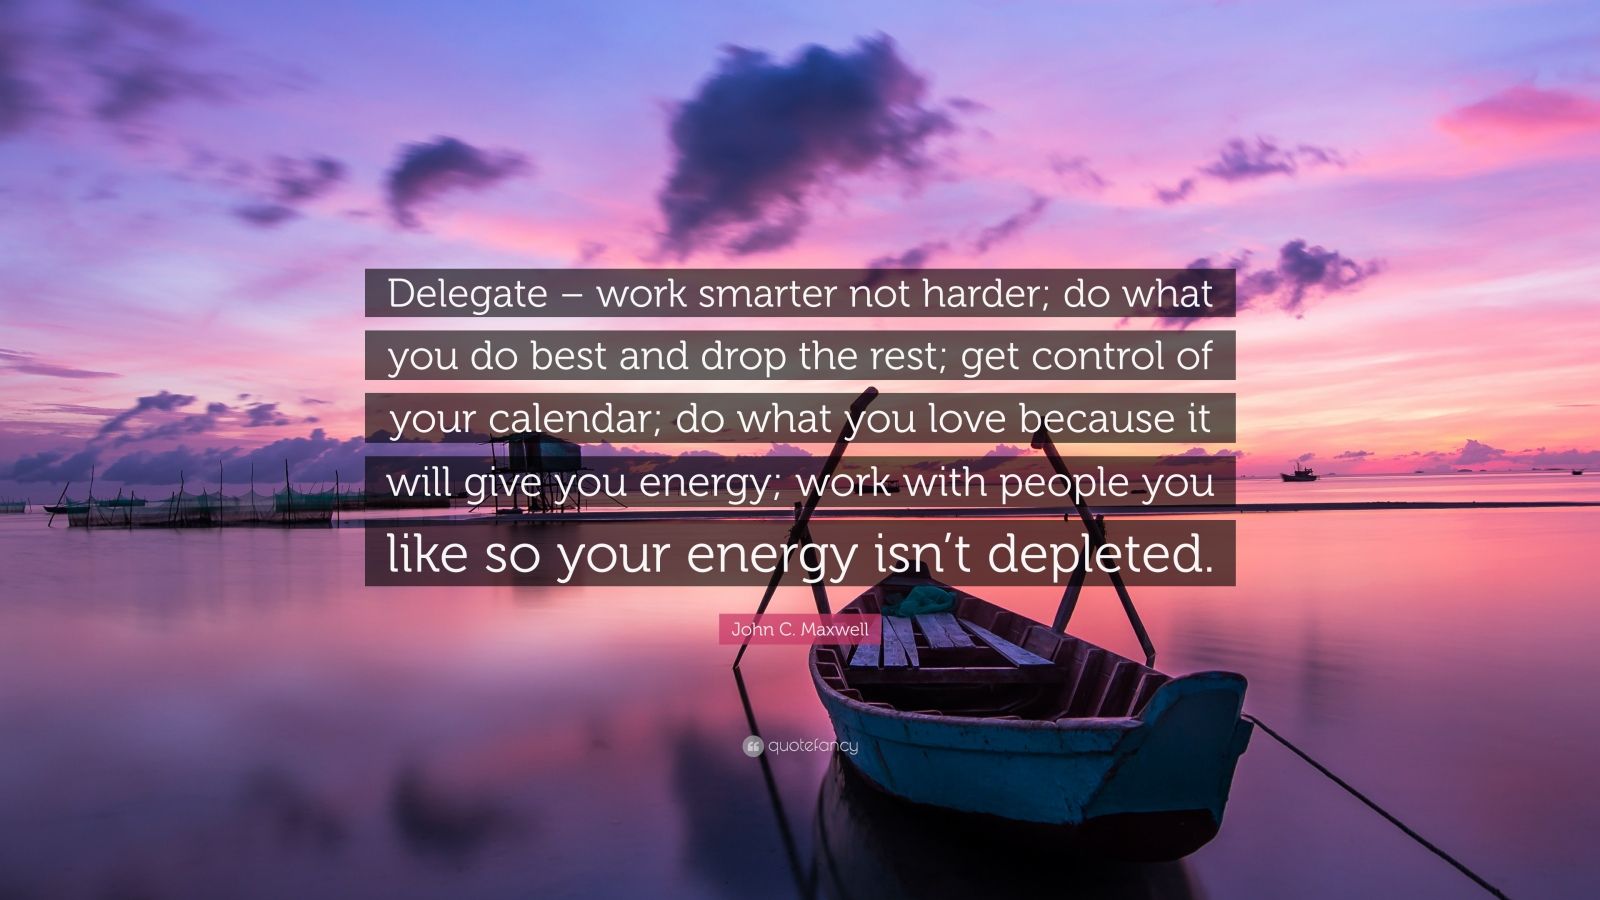 John C. Maxwell Quote: “Delegate – work smarter not harder; do what you